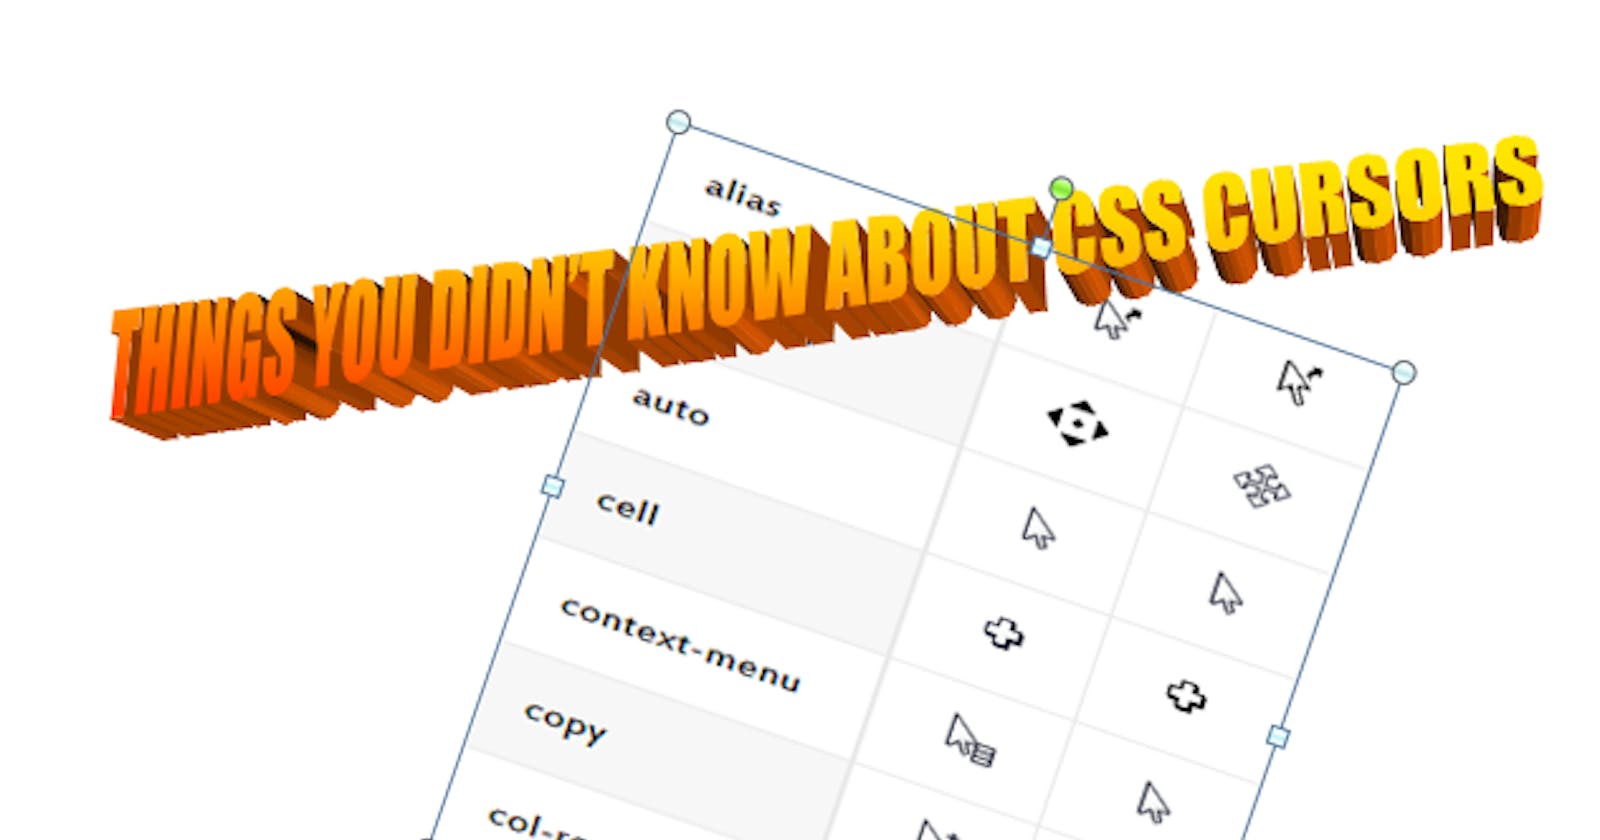 Things you didn't know about CSS Cursors